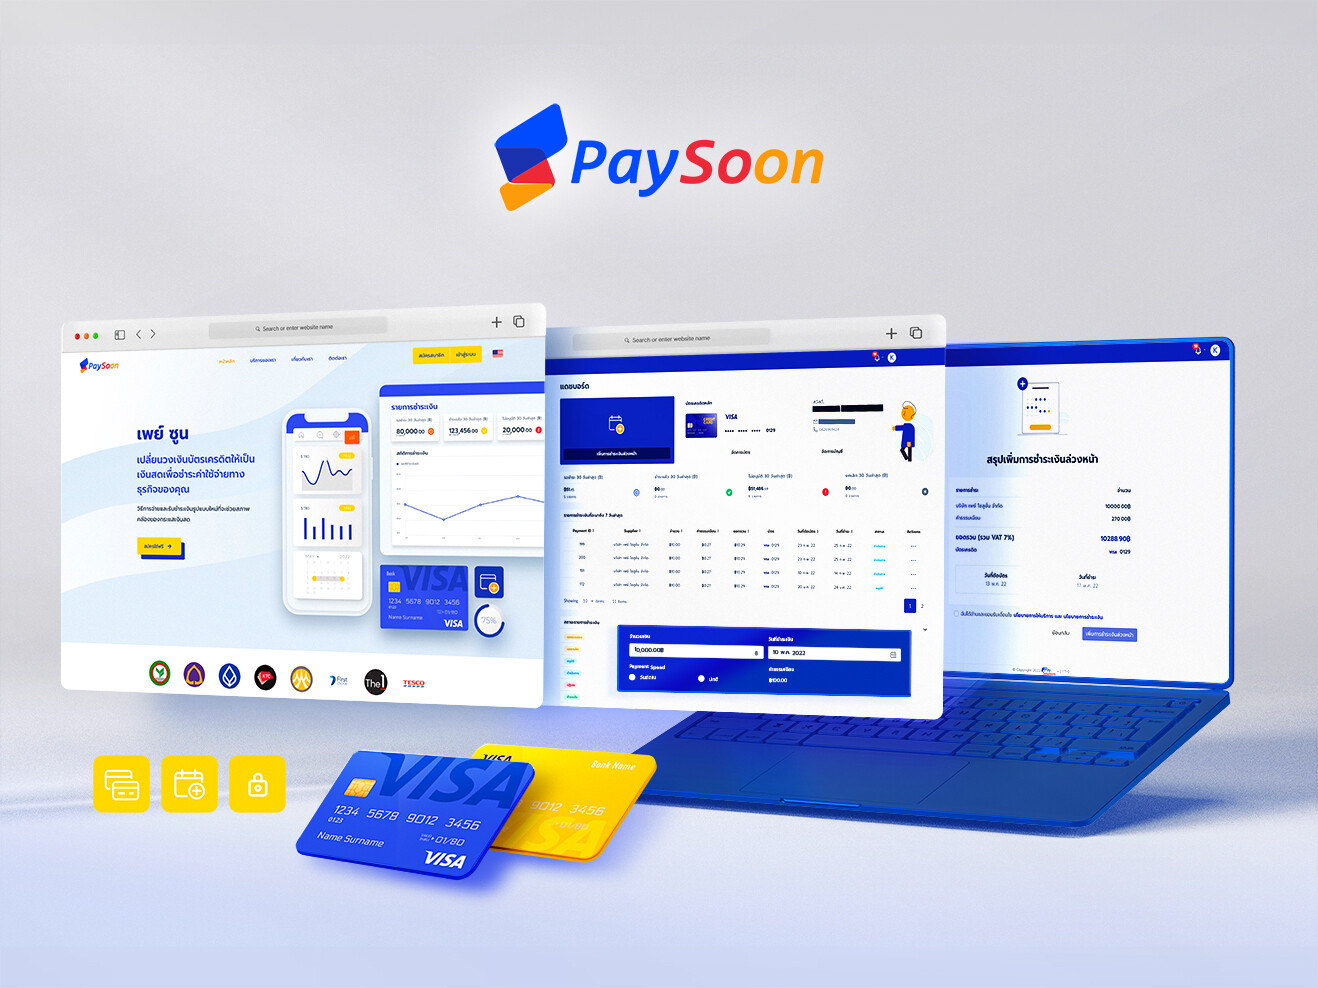 Pay Solutions Partners with VISA, BBL to Launch "PaySoon" B2B e-Payment Platform to Help Businesses Improve Efficiency